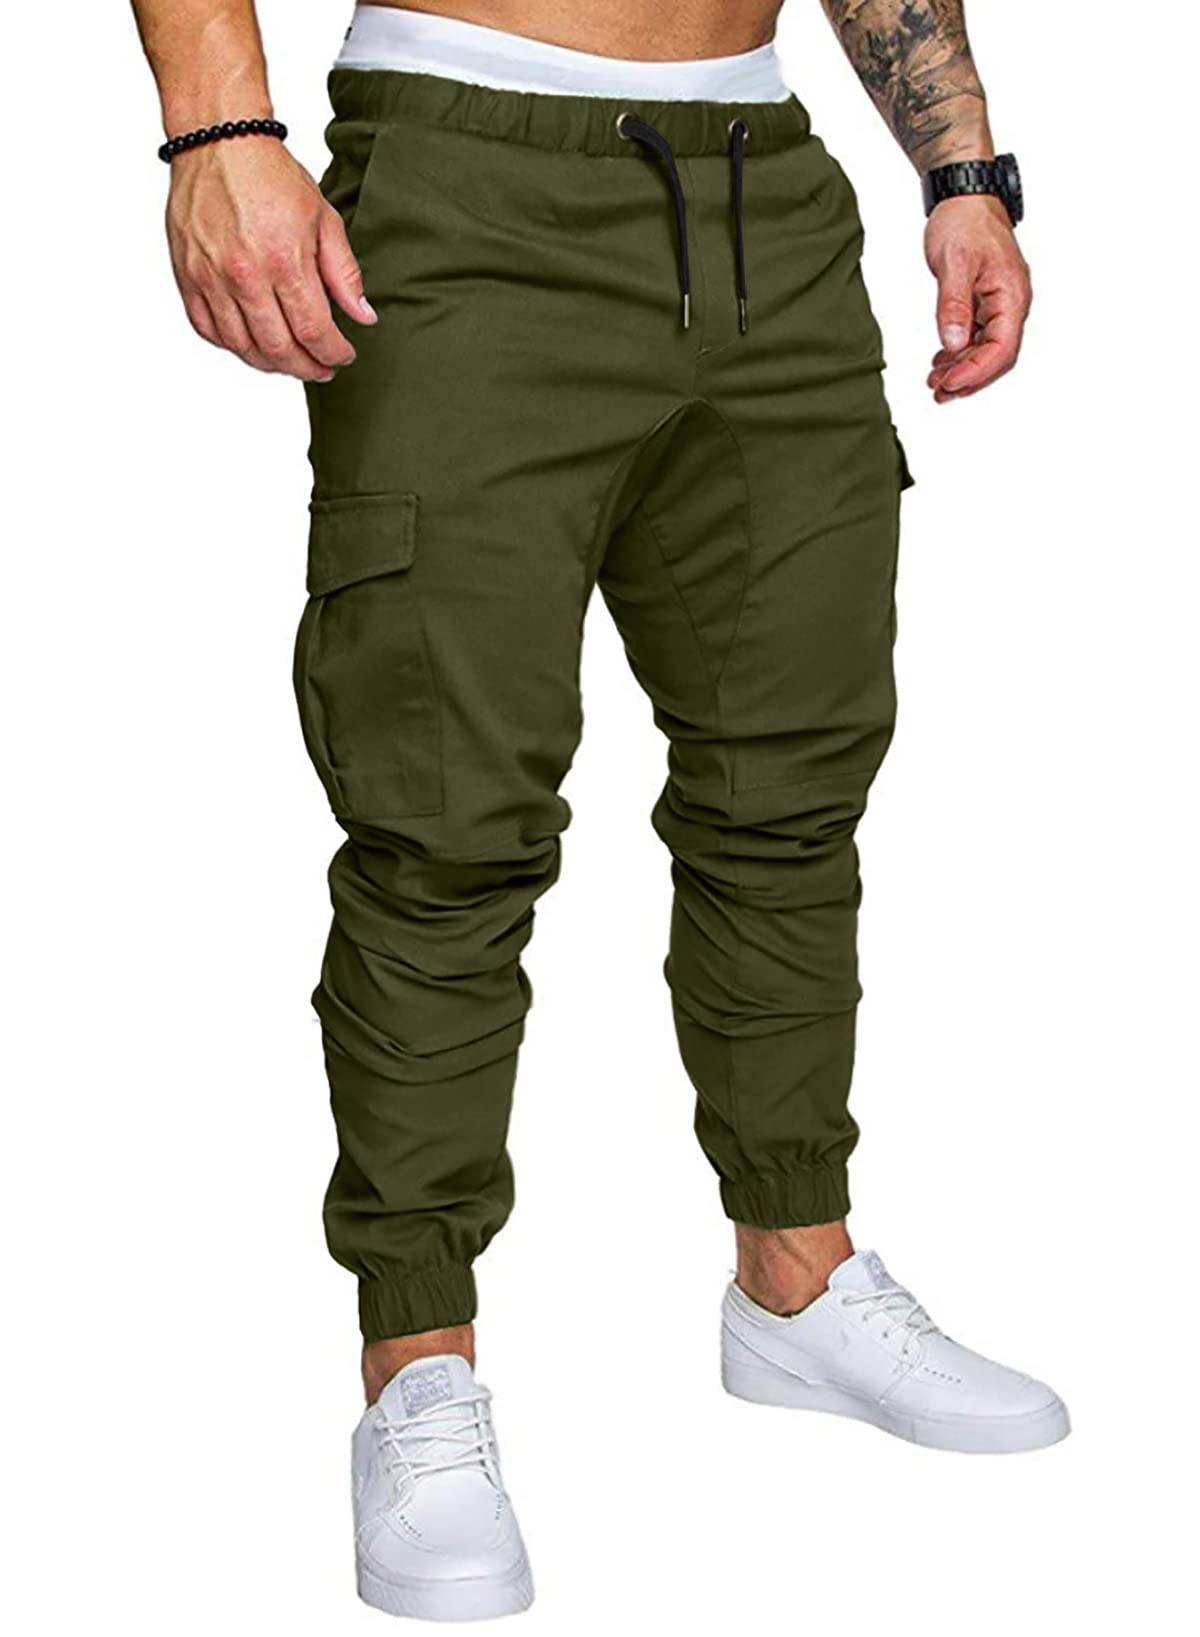 Clearance RYRJJ Mens Fashion Cargo Pants with Multi-Pockets Casual Cotton  Tapered Stretch Twill Drawstring Athletic Joggers Sweatpants(Army Green,XXL)